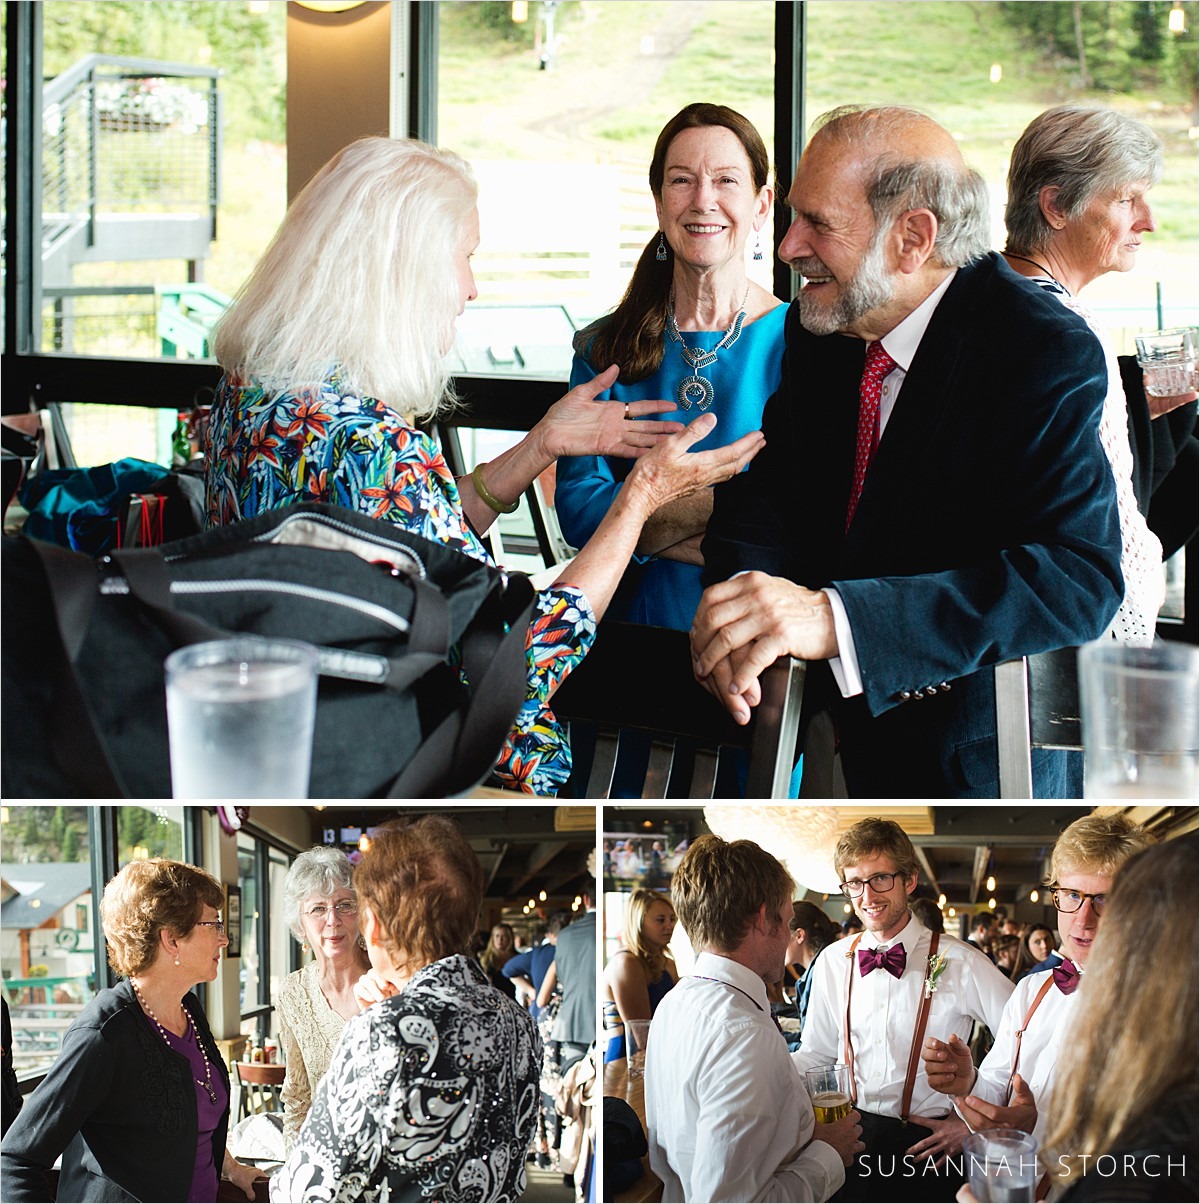 images of guests mingling during a wedding